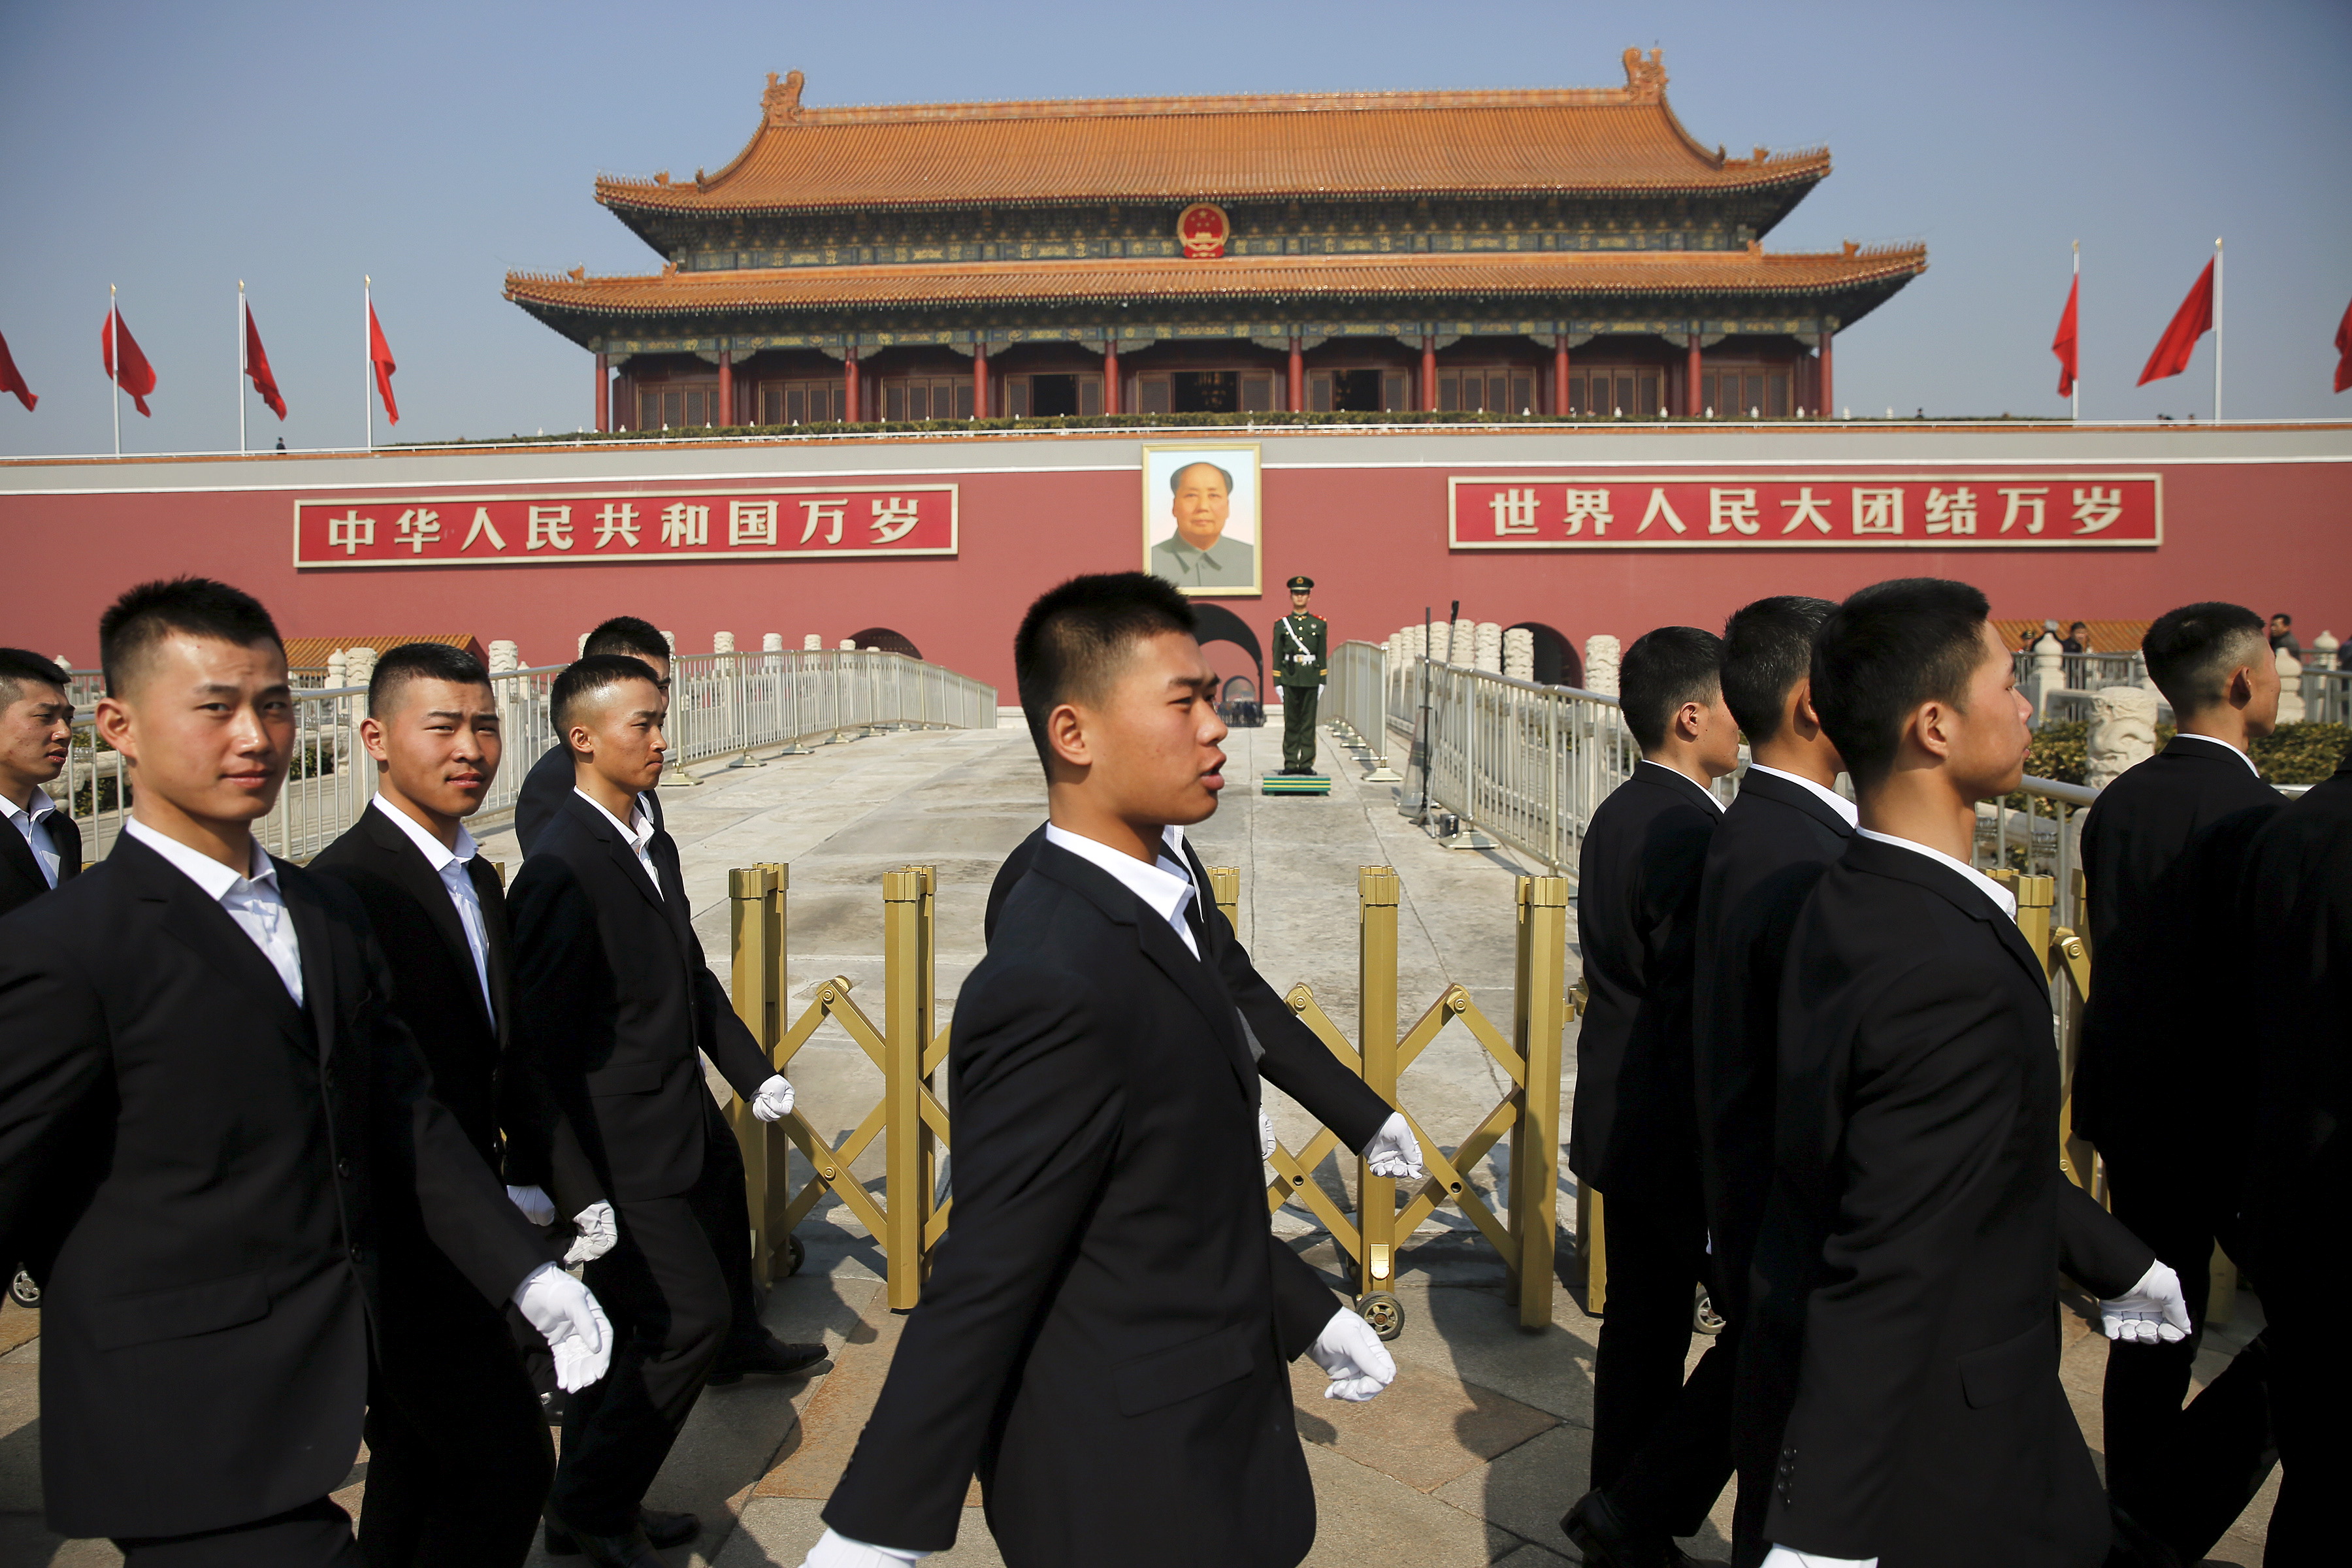 Security personnel march in front of Tiananmen Gate as the area near the Great Hall of the People prepares for upcoming annual sessions of the National People's Congress (NPC) and Chinese People's Political Consultative Conference (CPPCC), in Beijing